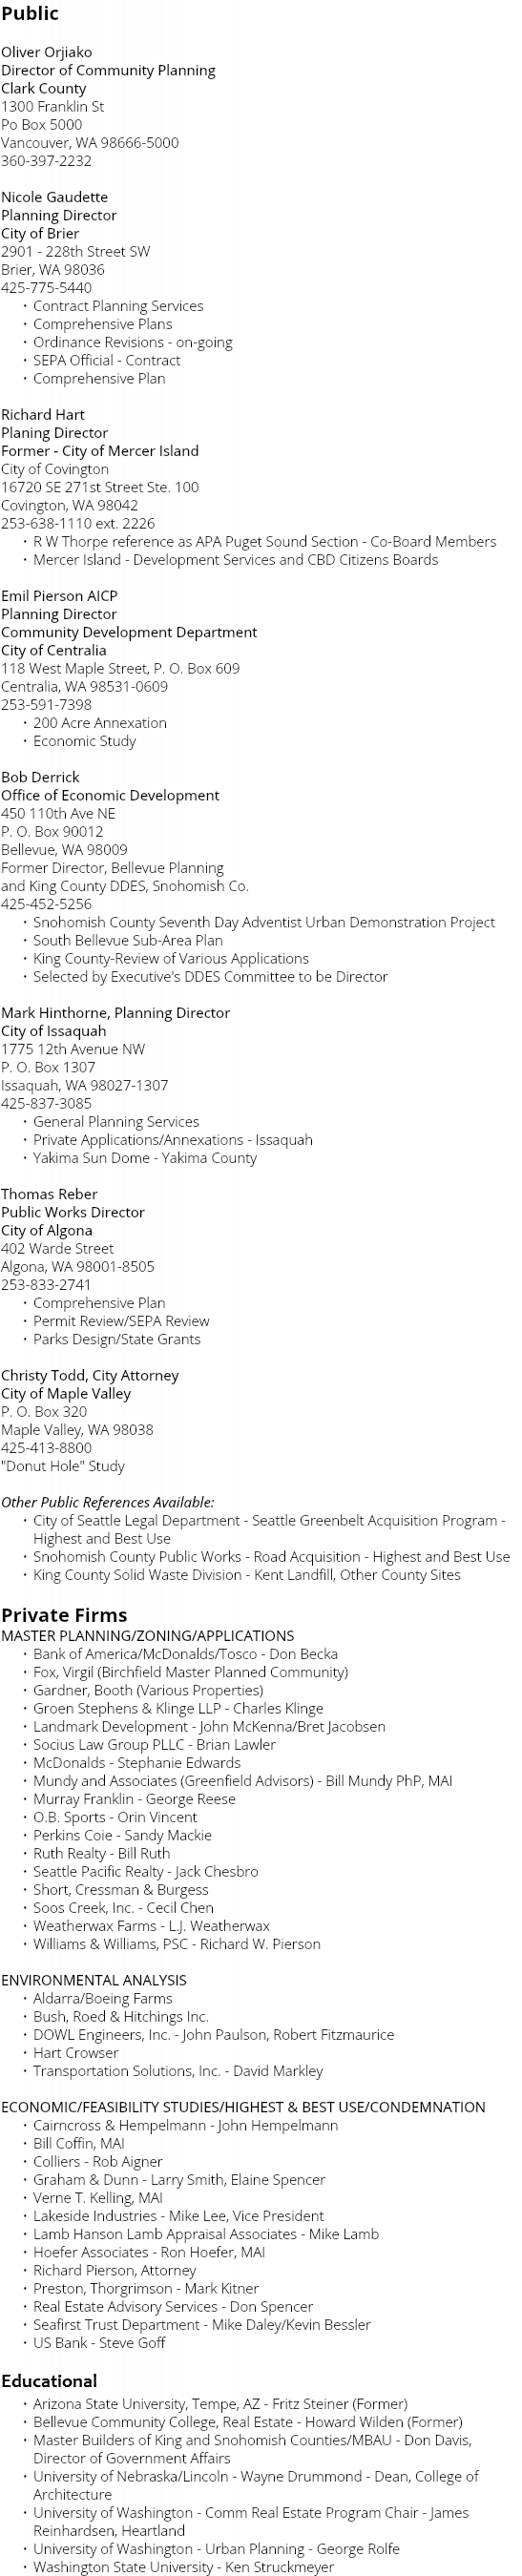 Public Oliver Orjiako Director of Community Planning Clark County 1300 Franklin St Po Box 5000 Vancouver, WA 98666-5000 360-397-2232 Nicole Gaudette Planning Director City of Brier 2901 - 228th Street SW Brier, WA 98036 425-775-5440 Contract Planning Services Comprehensive Plans Ordinance Revisions - on-going SEPA Official - Contract Comprehensive Plan Richard Hart Planing Director Former - City of Mercer Island City of Covington 16720 SE 271st Street Ste. 100 Covington, WA 98042 253-638-1110 ext. 2226 R W Thorpe reference as APA Puget Sound Section - Co-Board Members Mercer Island - Development Services and CBD Citizens Boards Emil Pierson AICP Planning Director Community Development Department City of Centralia 118 West Maple Street, P. O. Box 609 Centralia, WA 98531-0609 253-591-7398 200 Acre Annexation Economic Study Bob Derrick Office of Economic Development 450 110th Ave NE P. O. Box 90012 Bellevue, WA 98009 Former Director, Bellevue Planning and King County DDES, Snohomish Co. 425-452-5256 Snohomish County Seventh Day Adventist Urban Demonstration Project South Bellevue Sub-Area Plan King County-Review of Various Applications Selected by Executive's DDES Committee to be Director Mark Hinthorne, Planning Director City of Issaquah 1775 12th Avenue NW P. O. Box 1307 Issaquah, WA 98027-1307 425-837-3085 General Planning Services Private Applications/Annexations - Issaquah Yakima Sun Dome - Yakima County Thomas Reber Public Works Director City of Algona 402 Warde Street Algona, WA 98001-8505 253-833-2741 Comprehensive Plan Permit Review/SEPA Review Parks Design/State Grants Christy Todd, City Attorney City of Maple Valley P. O. Box 320 Maple Valley, WA 98038 425-413-8800 "Donut Hole" Study Other Public References Available: City of Seattle Legal Department - Seattle Greenbelt Acquisition Program - Highest and Best Use Snohomish County Public Works - Road Acquisition - Highest and Best Use King County Solid Waste Division - Kent Landfill, Other County Sites Private Firms MASTER PLANNING/ZONING/APPLICATIONS Bank of America/McDonalds/Tosco - Don Becka Fox, Virgil (Birchfield Master Planned Community) Gardner, Booth (Various Properties) Groen Stephens & Klinge LLP - Charles Klinge Landmark Development - John McKenna/Bret Jacobsen Socius Law Group PLLC - Brian Lawler McDonalds - Stephanie Edwards Mundy and Associates (Greenfield Advisors) - Bill Mundy PhP, MAI Murray Franklin - George Reese O.B. Sports - Orin Vincent Perkins Coie - Sandy Mackie Ruth Realty - Bill Ruth Seattle Pacific Realty - Jack Chesbro Short, Cressman & Burgess Soos Creek, Inc. - Cecil Chen Weatherwax Farms - L.J. Weatherwax Williams & Williams, PSC - Richard W. Pierson ENVIRONMENTAL ANALYSIS Aldarra/Boeing Farms Bush, Roed & Hitchings Inc. DOWL Engineers, Inc. - John Paulson, Robert Fitzmaurice Hart Crowser Transportation Solutions, Inc. - David Markley ECONOMIC/FEASIBILITY STUDIES/HIGHEST & BEST USE/CONDEMNATION Cairncross & Hempelmann - John Hempelmann Bill Coffin, MAI Colliers - Rob Aigner Graham & Dunn - Larry Smith, Elaine Spencer Verne T. Kelling, MAI Lakeside Industries - Mike Lee, Vice President Lamb Hanson Lamb Appraisal Associates - Mike Lamb Hoefer Associates - Ron Hoefer, MAI Richard Pierson, Attorney Preston, Thorgrimson - Mark Kitner Real Estate Advisory Services - Don Spencer Seafirst Trust Department - Mike Daley/Kevin Bessler US Bank - Steve Goff Educational Arizona State University, Tempe, AZ - Fritz Steiner (Former) Bellevue Community College, Real Estate - Howard Wilden (Former) Master Builders of King and Snohomish Counties/MBAU - Don Davis, Director of Government Affairs University of Nebraska/Lincoln - Wayne Drummond - Dean, College of Architecture University of Washington - Comm Real Estate Program Chair - James Reinhardsen, Heartland University of Washington - Urban Planning - George Rolfe Washington State University - Ken Struckmeyer